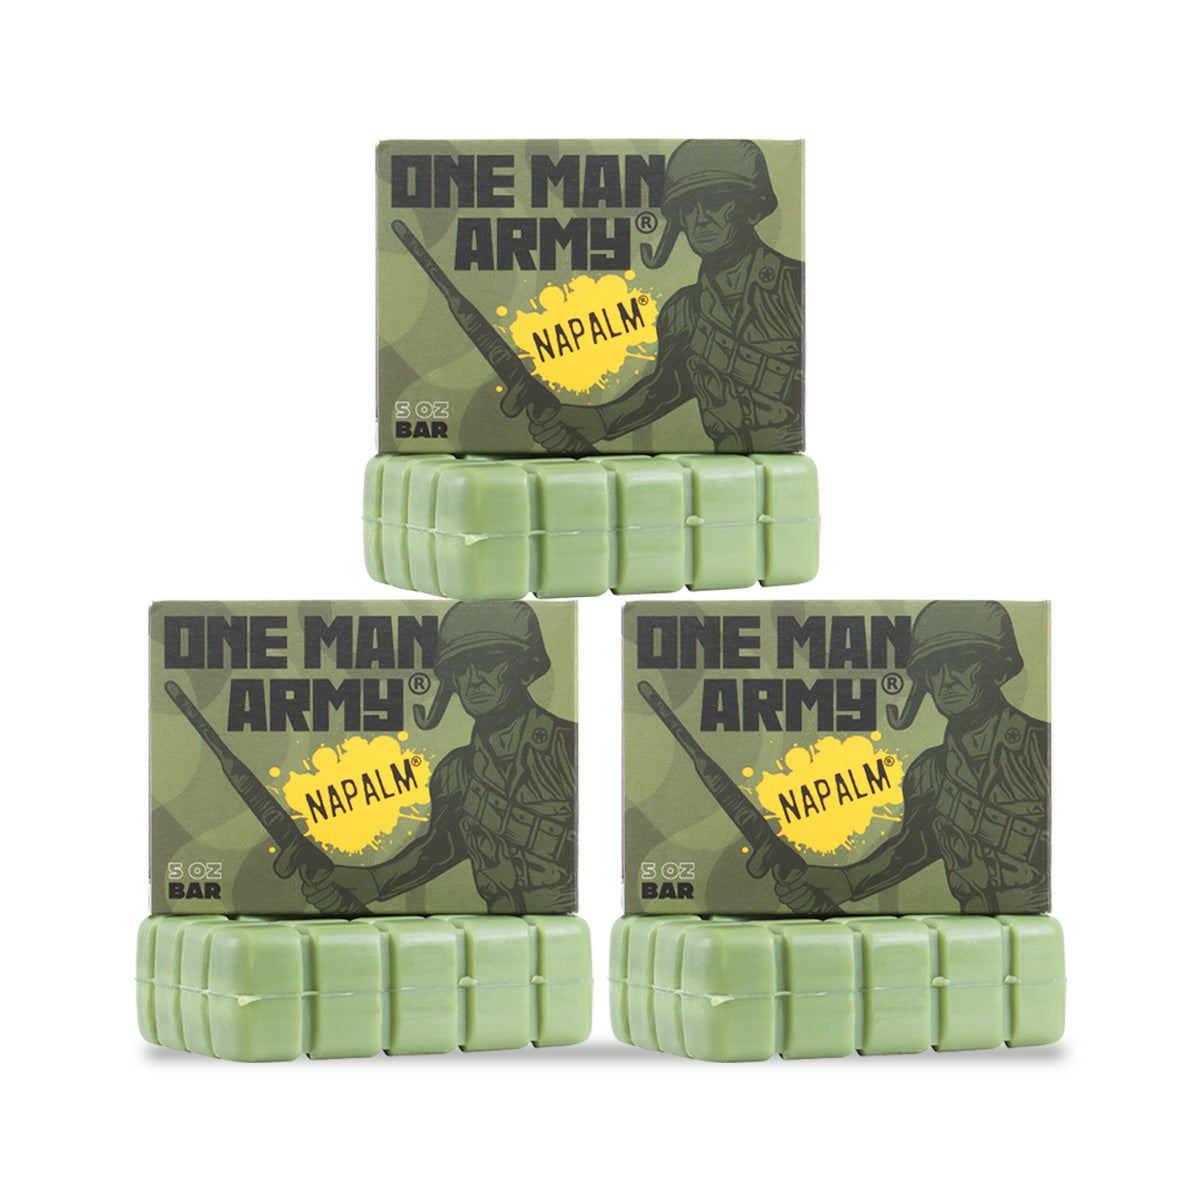 GRENADE® X ONE MAN ARMY NAPALM® - 3 PACK